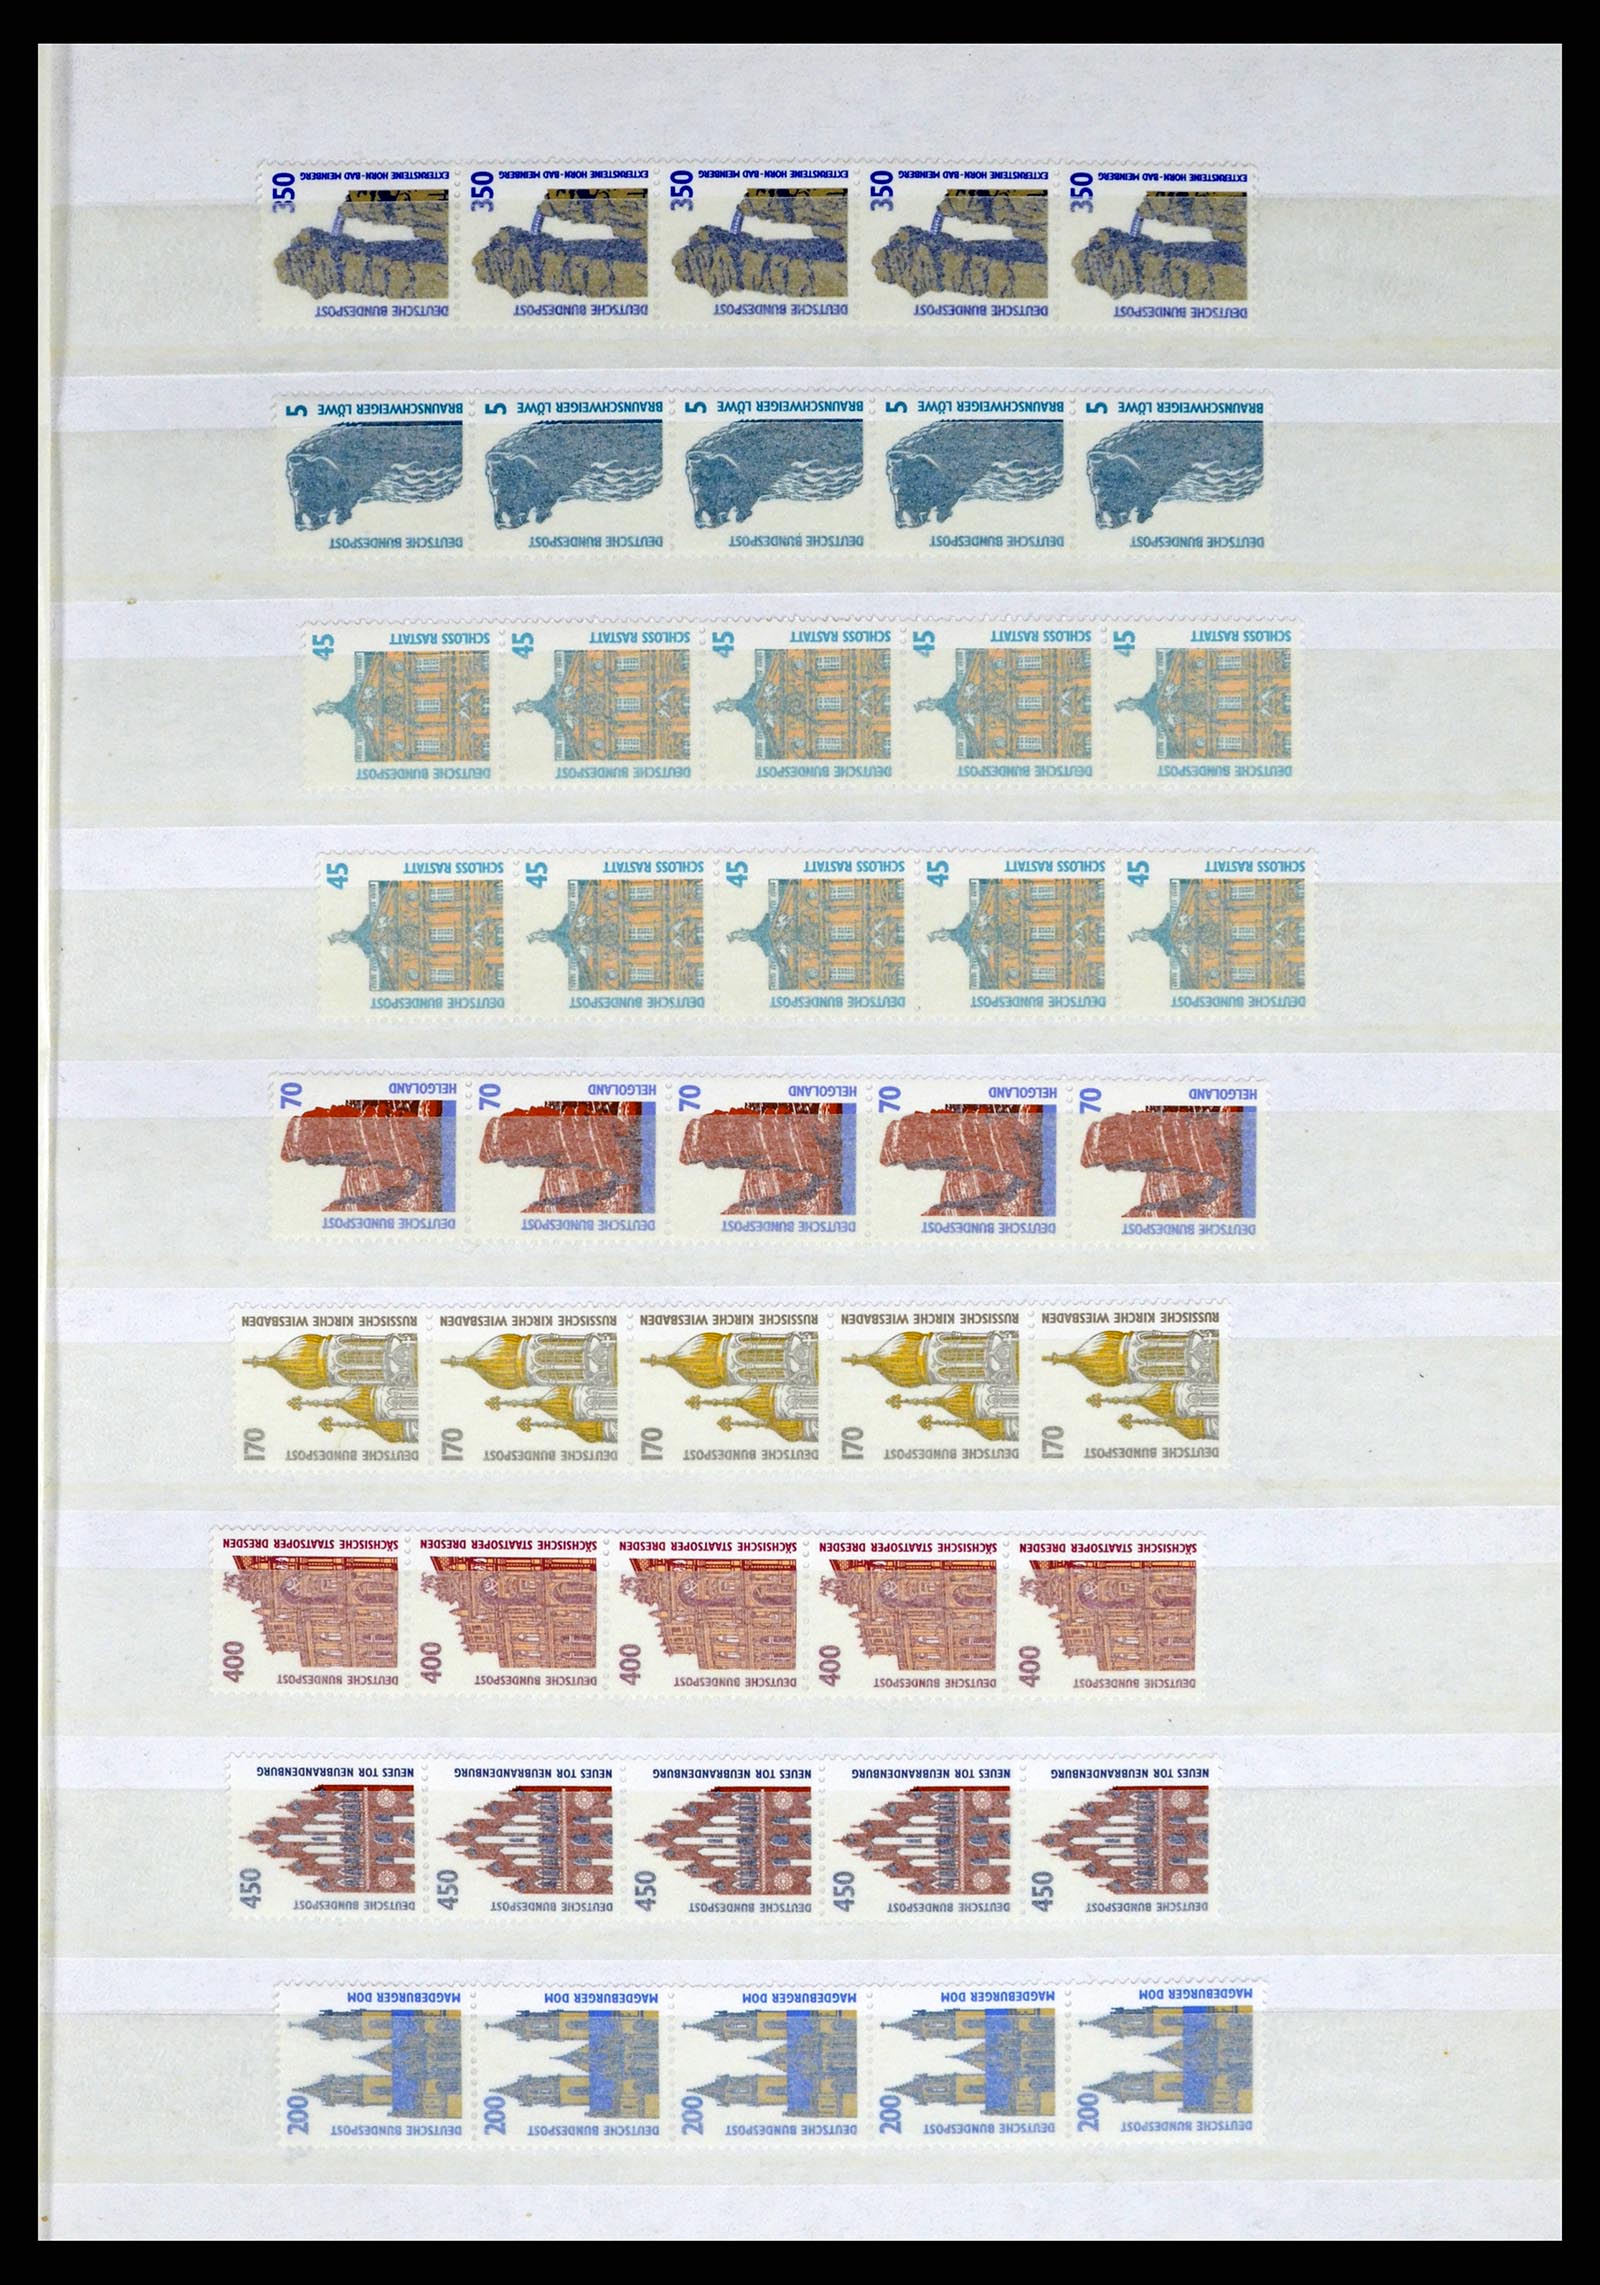 37354 073 - Stamp collection 37354 Bundespost and Berlin 1955-2000.